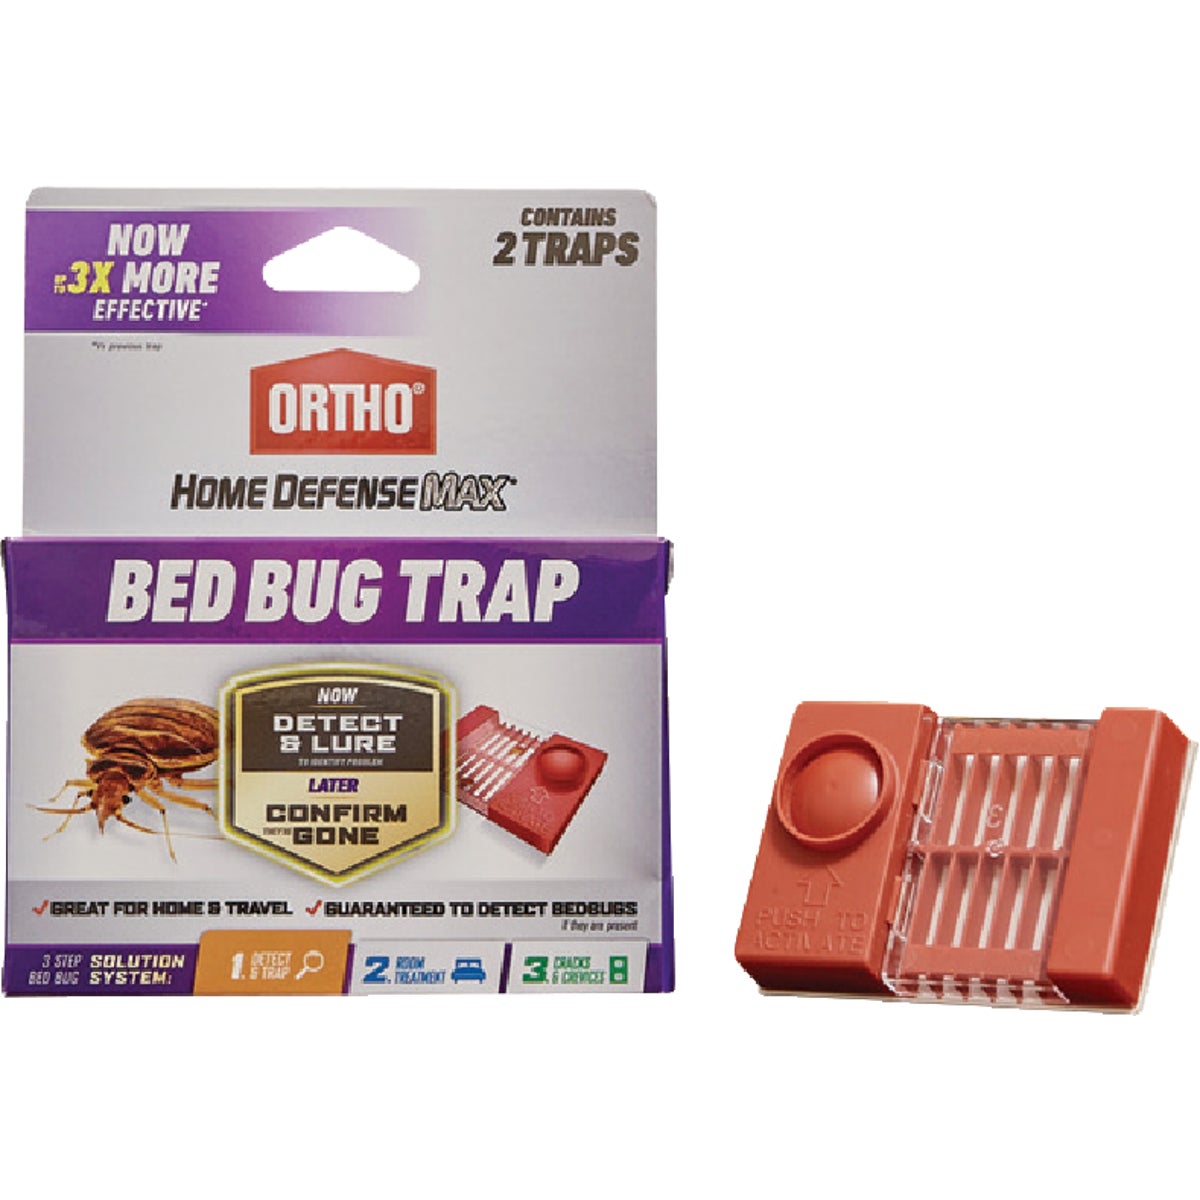 Item 705521, Fast acting bedbug trap. Lure, detect, and trap bedbugs in under an hour.